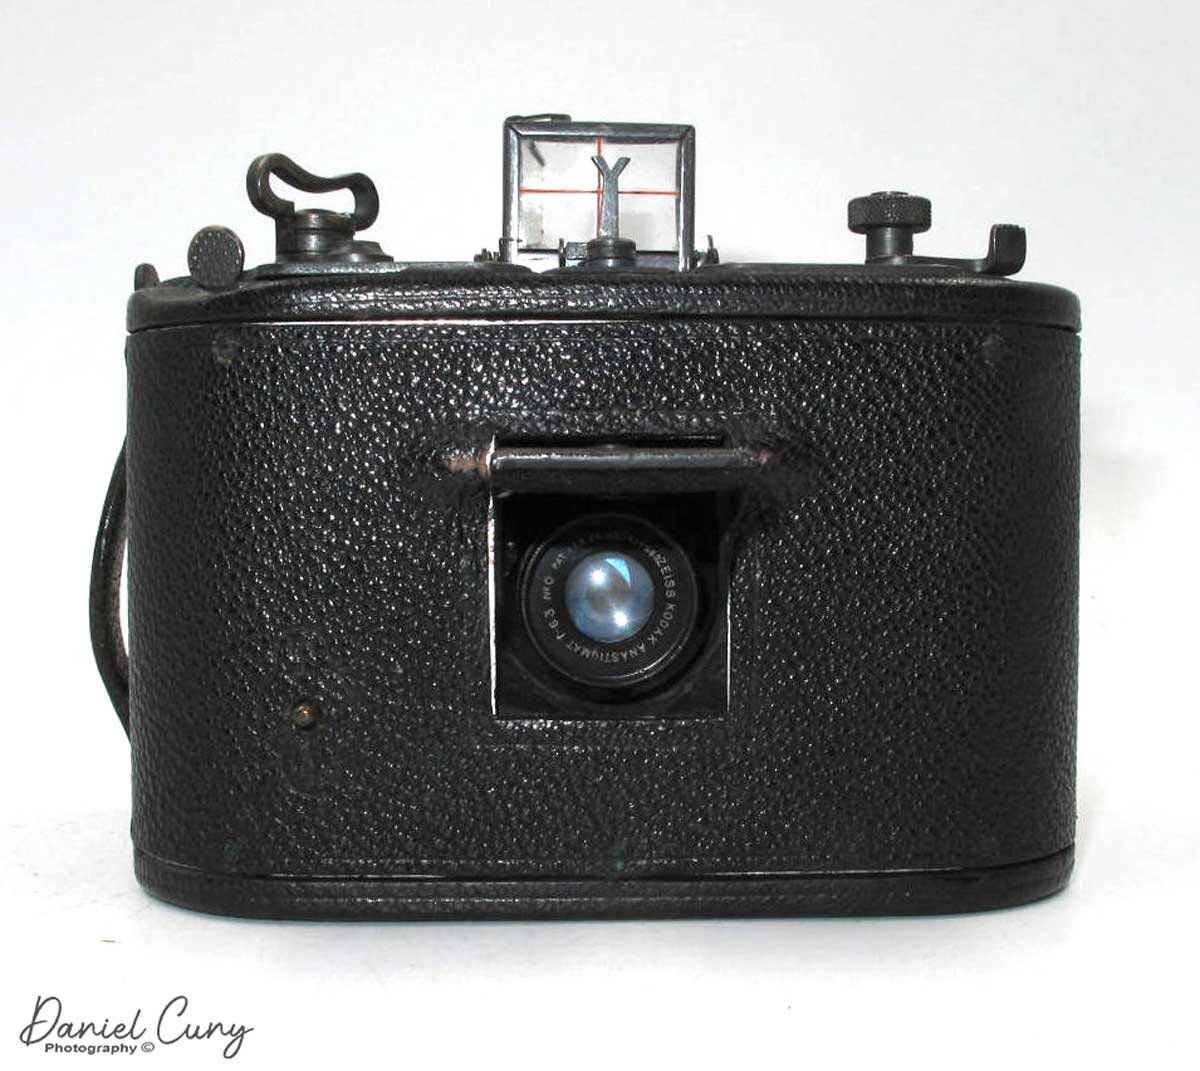 Front of No. 0 Graphic camera